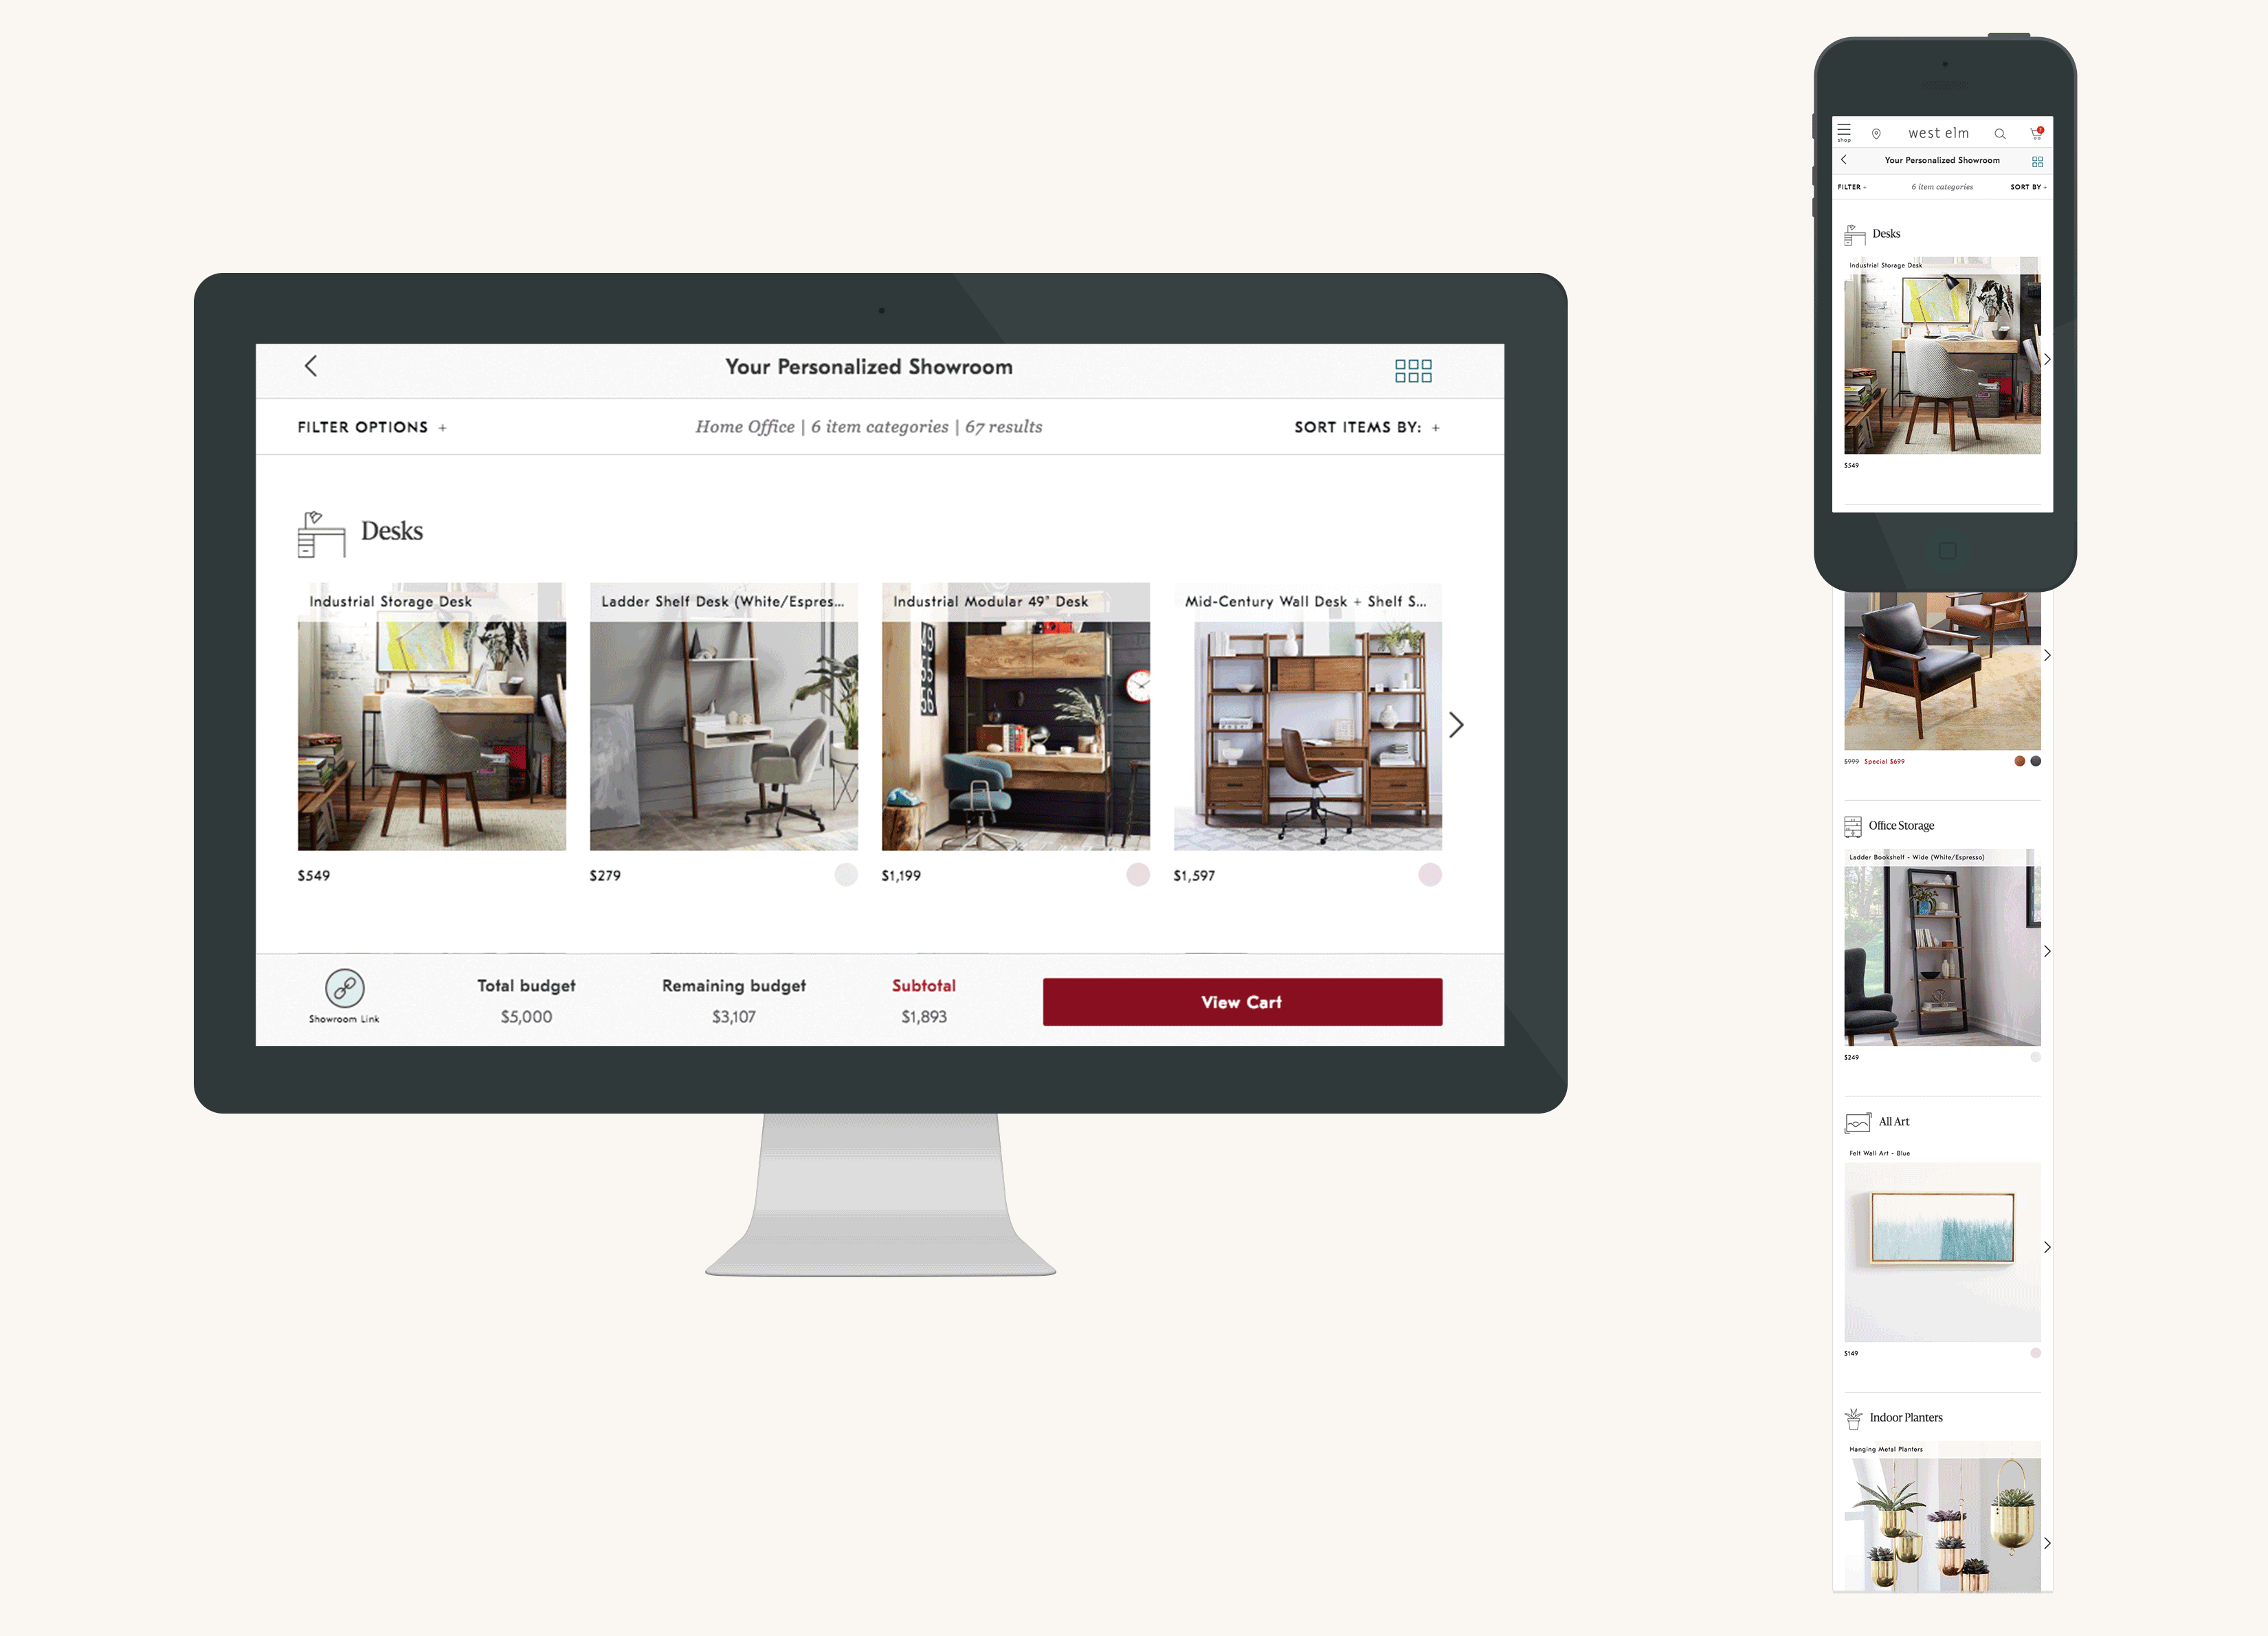 A desktop and mobile view of the final experience - Guided Shop